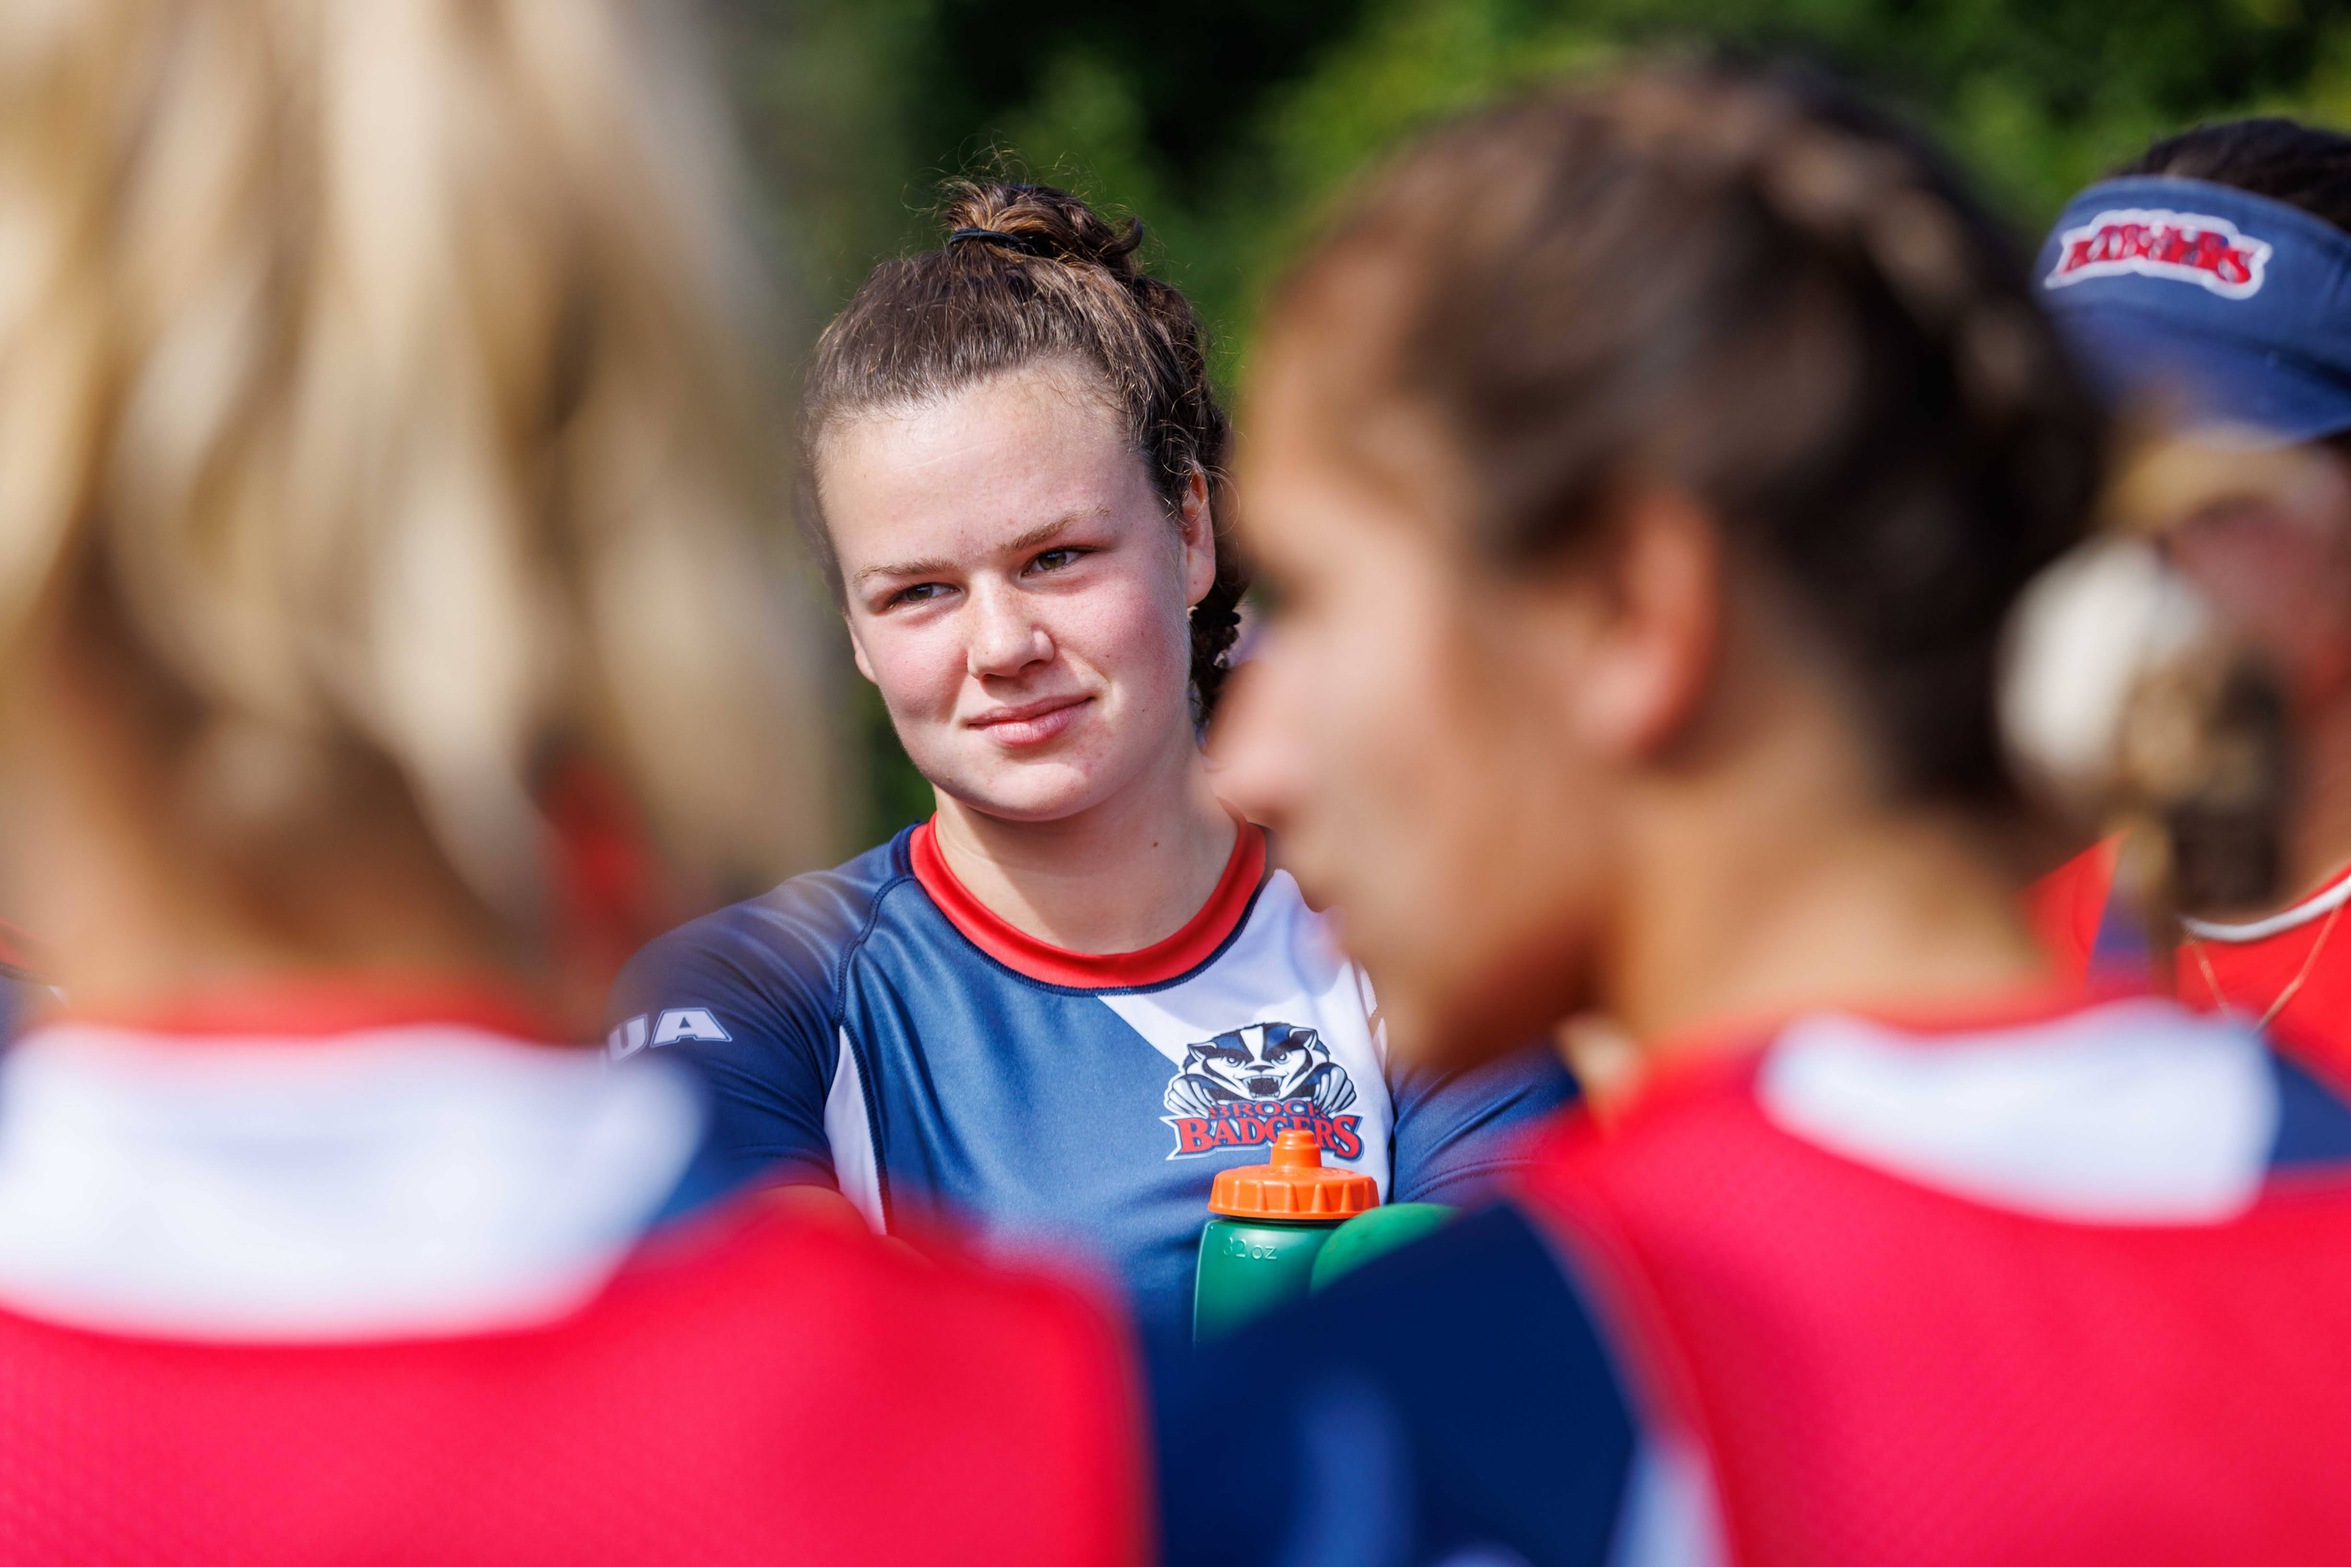  Close-up photo of young woman's face framed by out-of-focus teammates. 